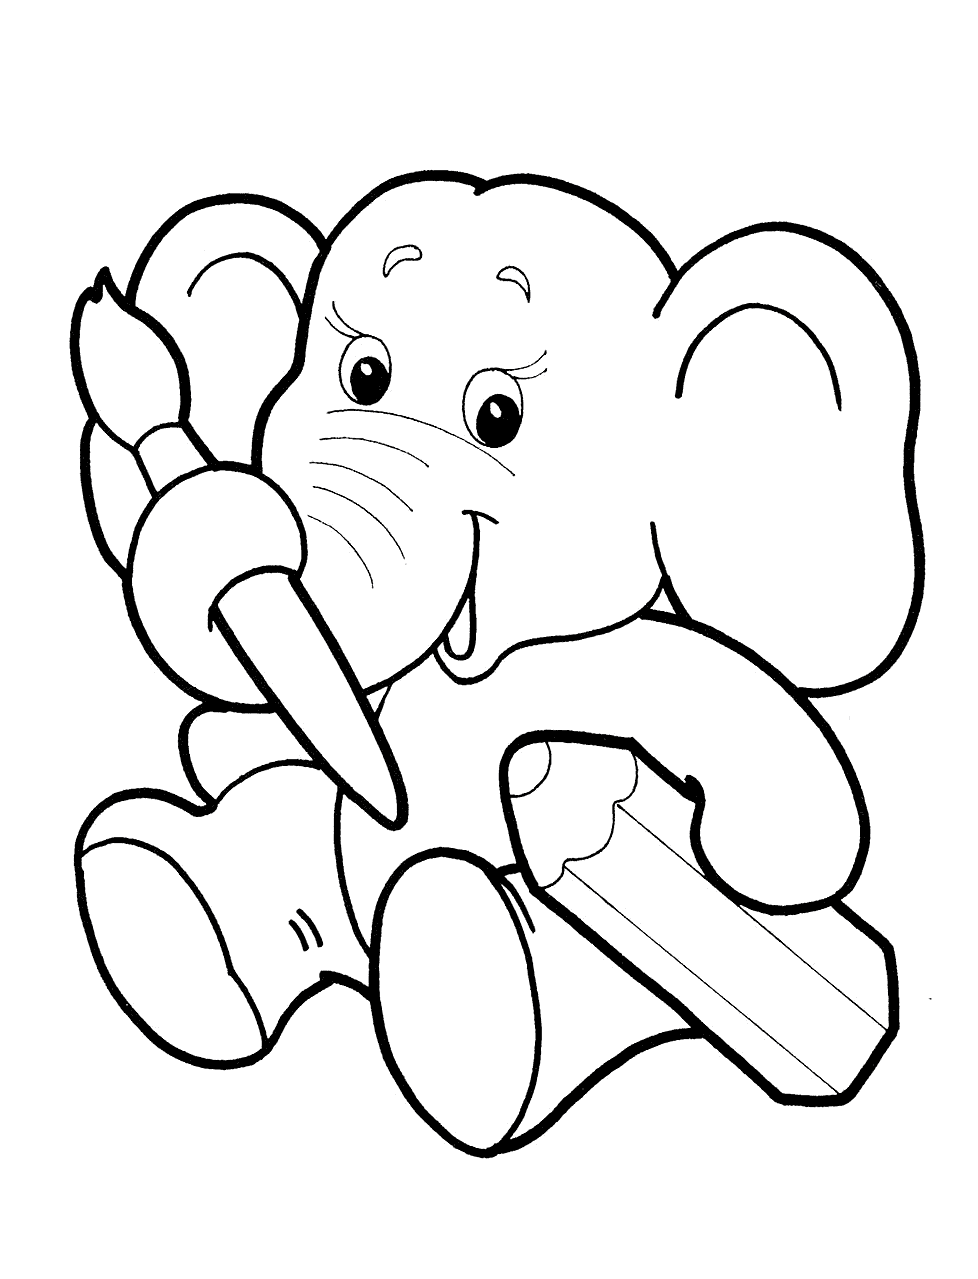 Coloring page - Baby elephant